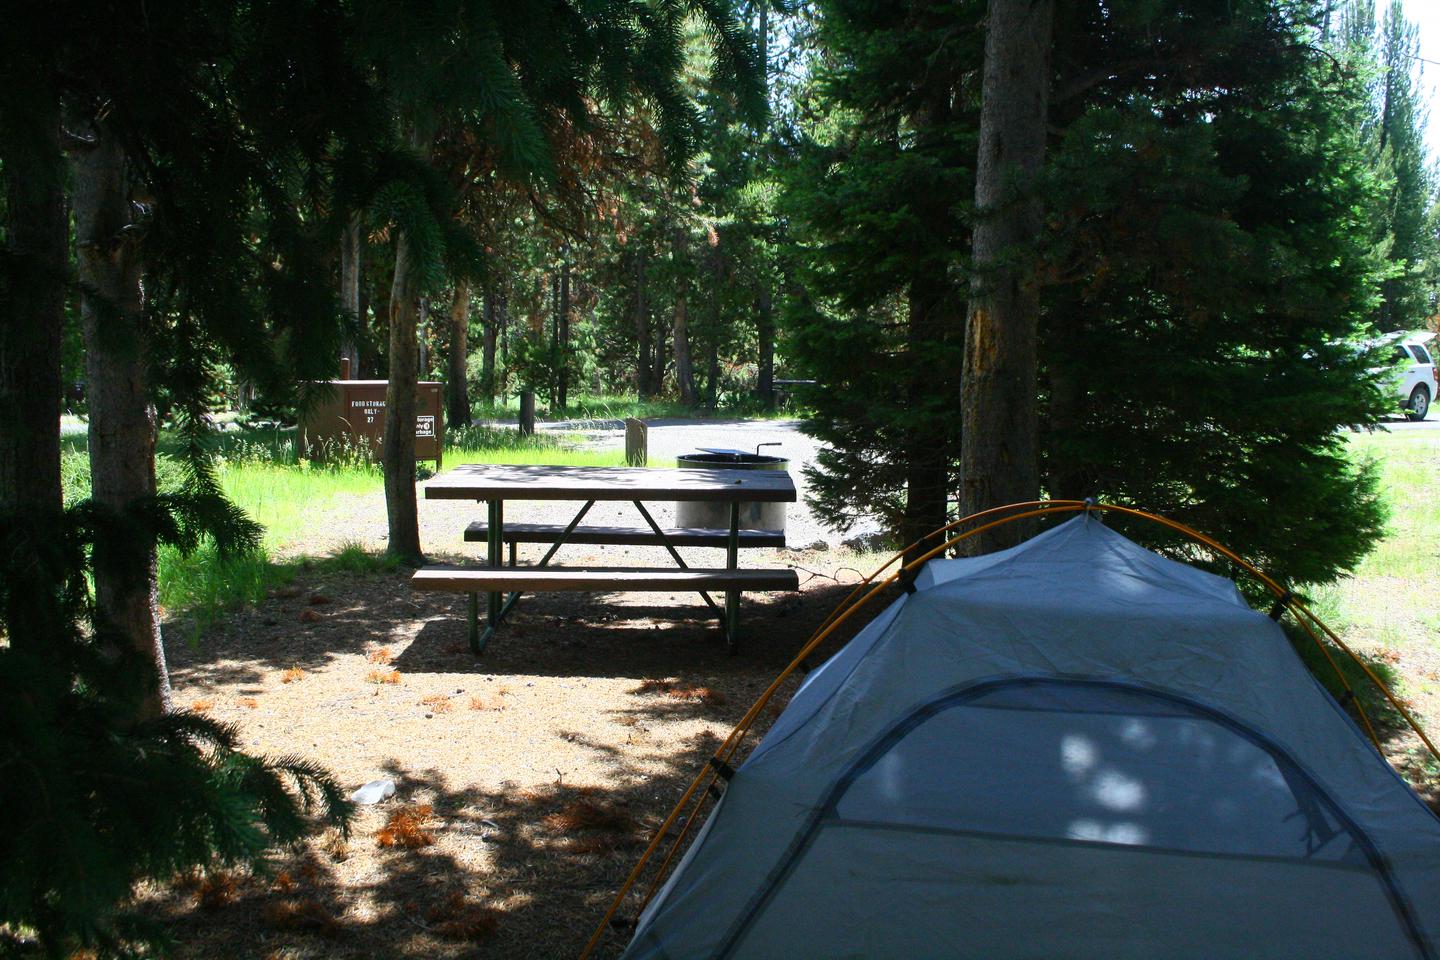 Indian Creek Campground site #27